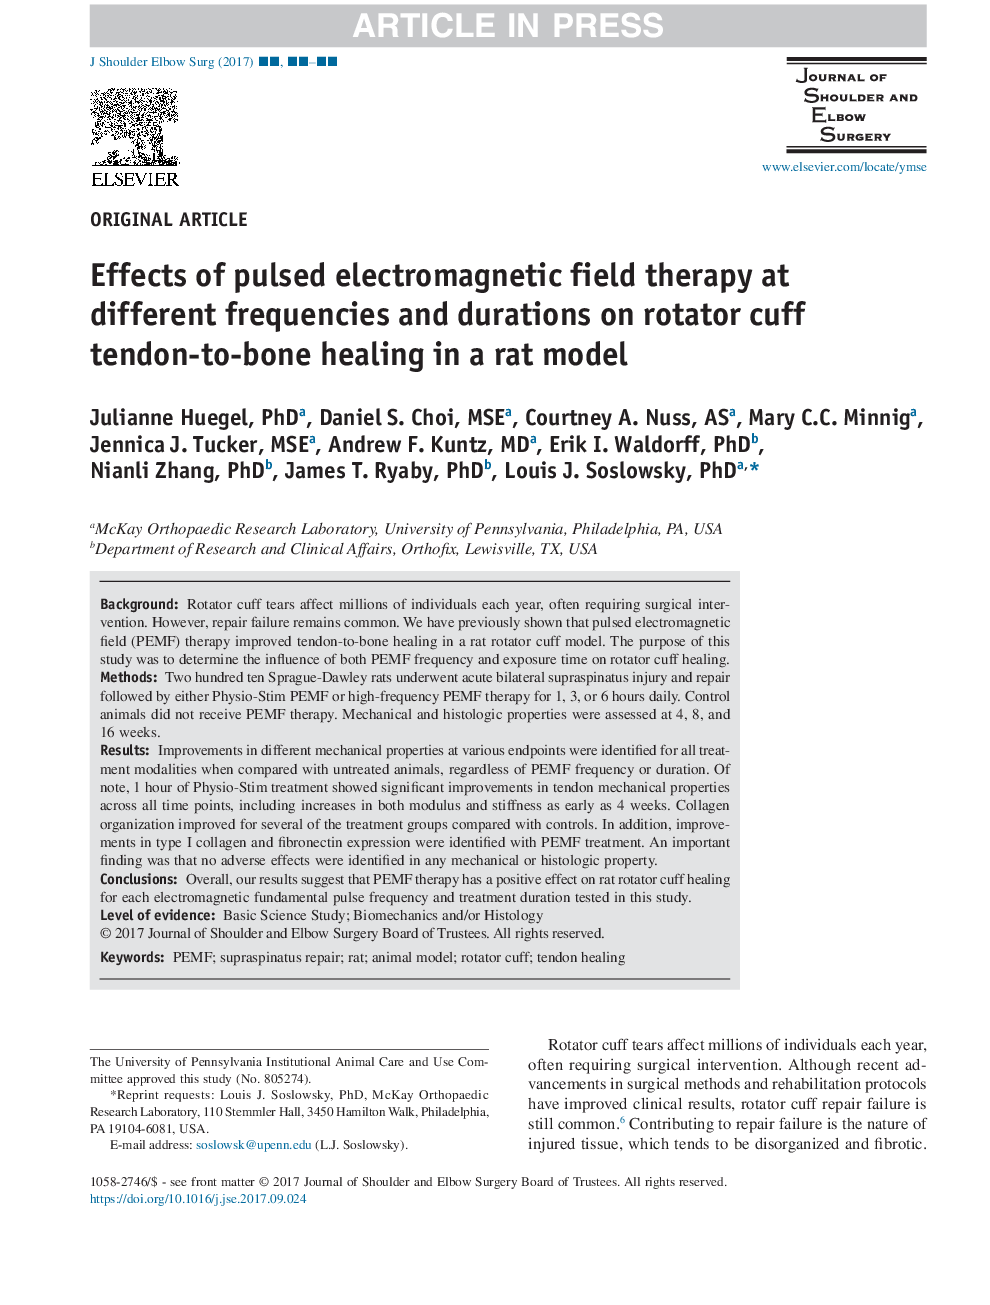 Effects of pulsed electromagnetic field therapy at different frequencies and durations on rotator cuff tendon-to-bone healing in a rat model